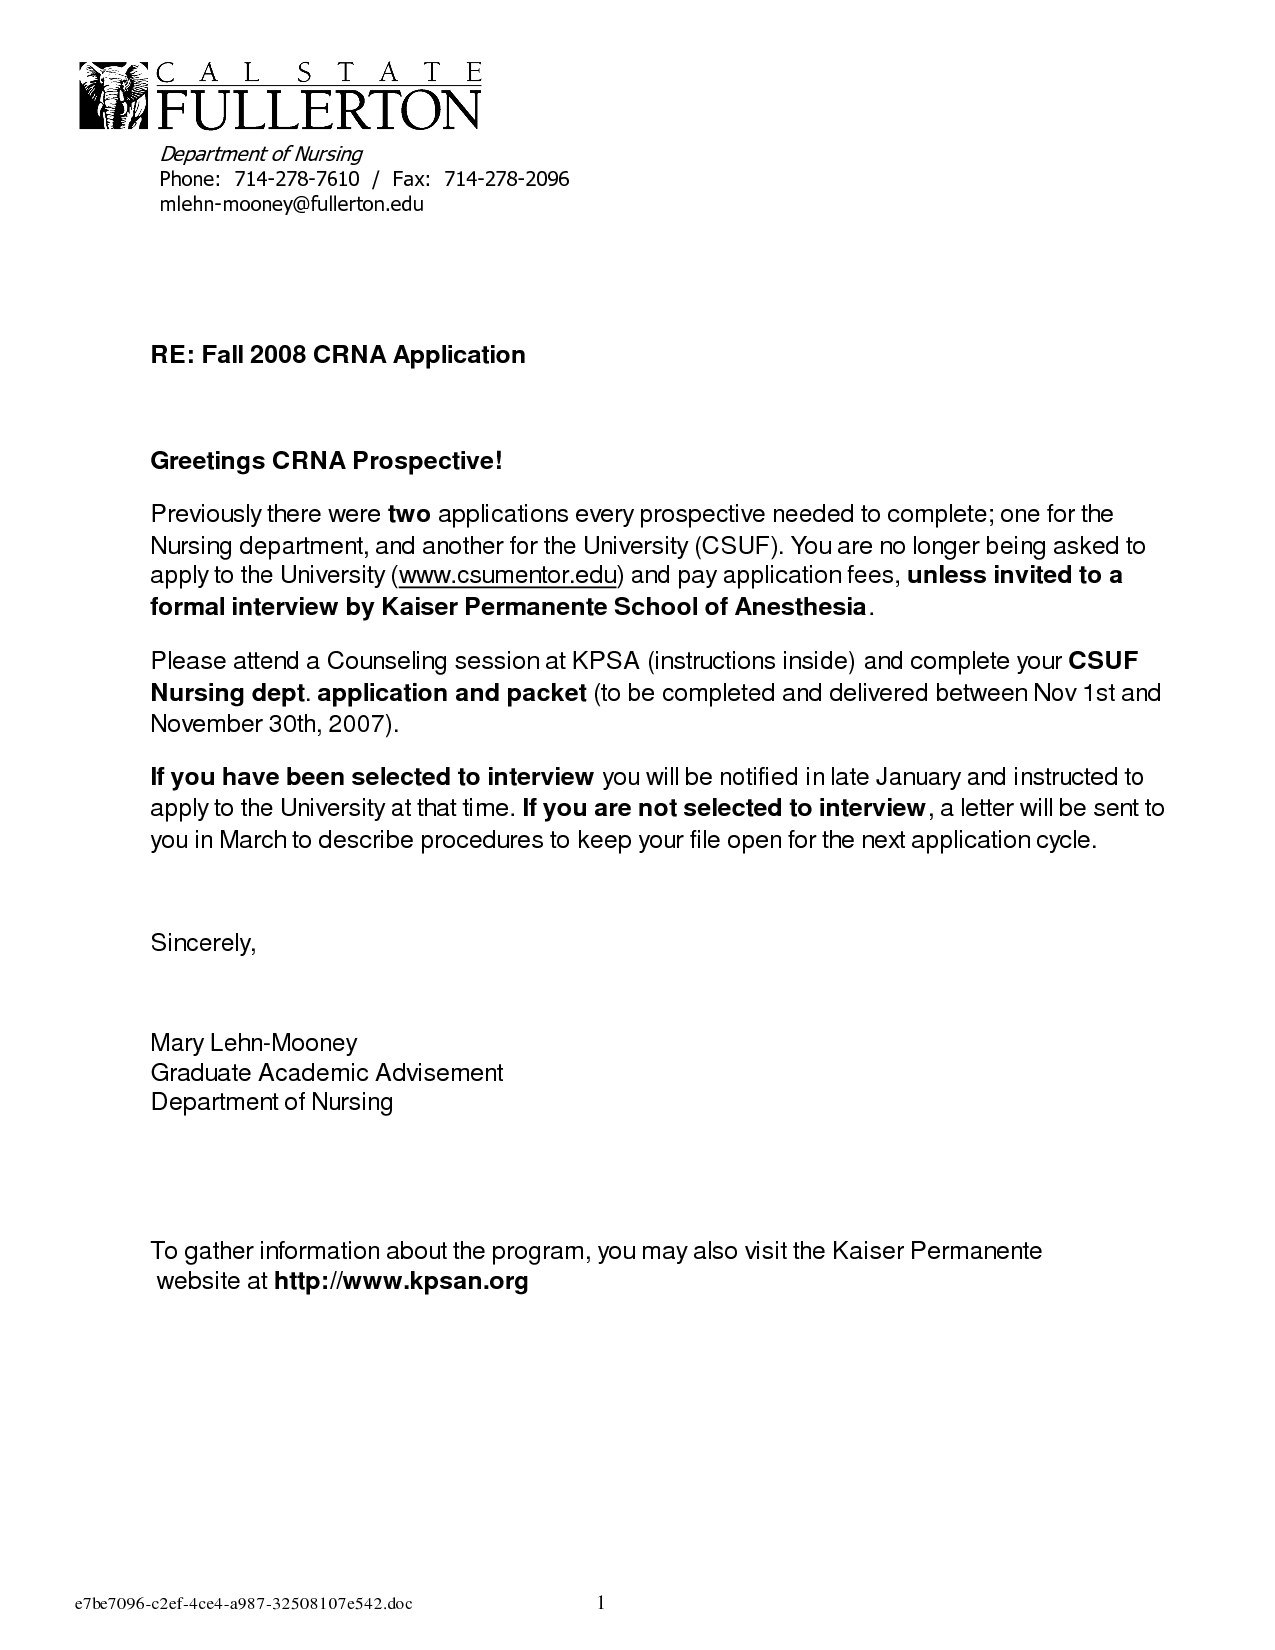 28+ Reference Letter Template – Free Sample, Example Format 